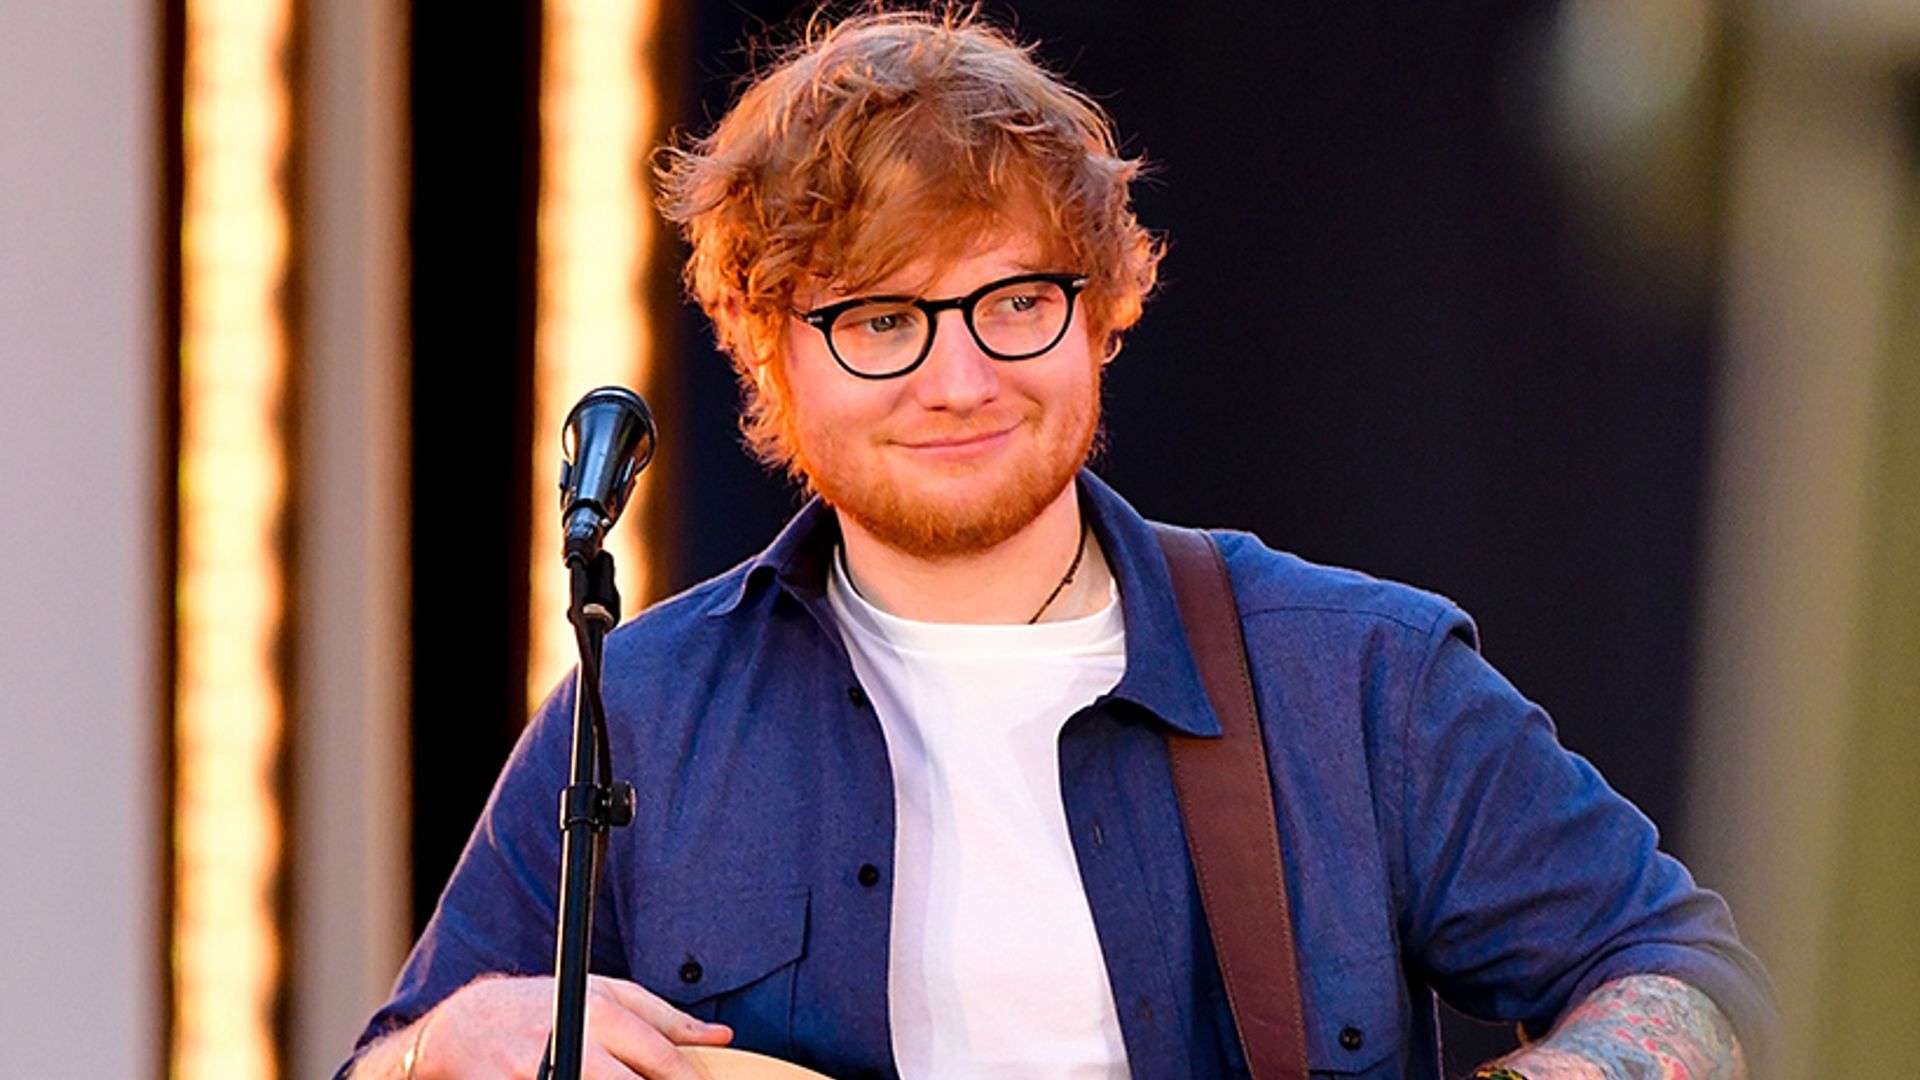 Ed Sheeran rushed to hospital after being knocked off his bike